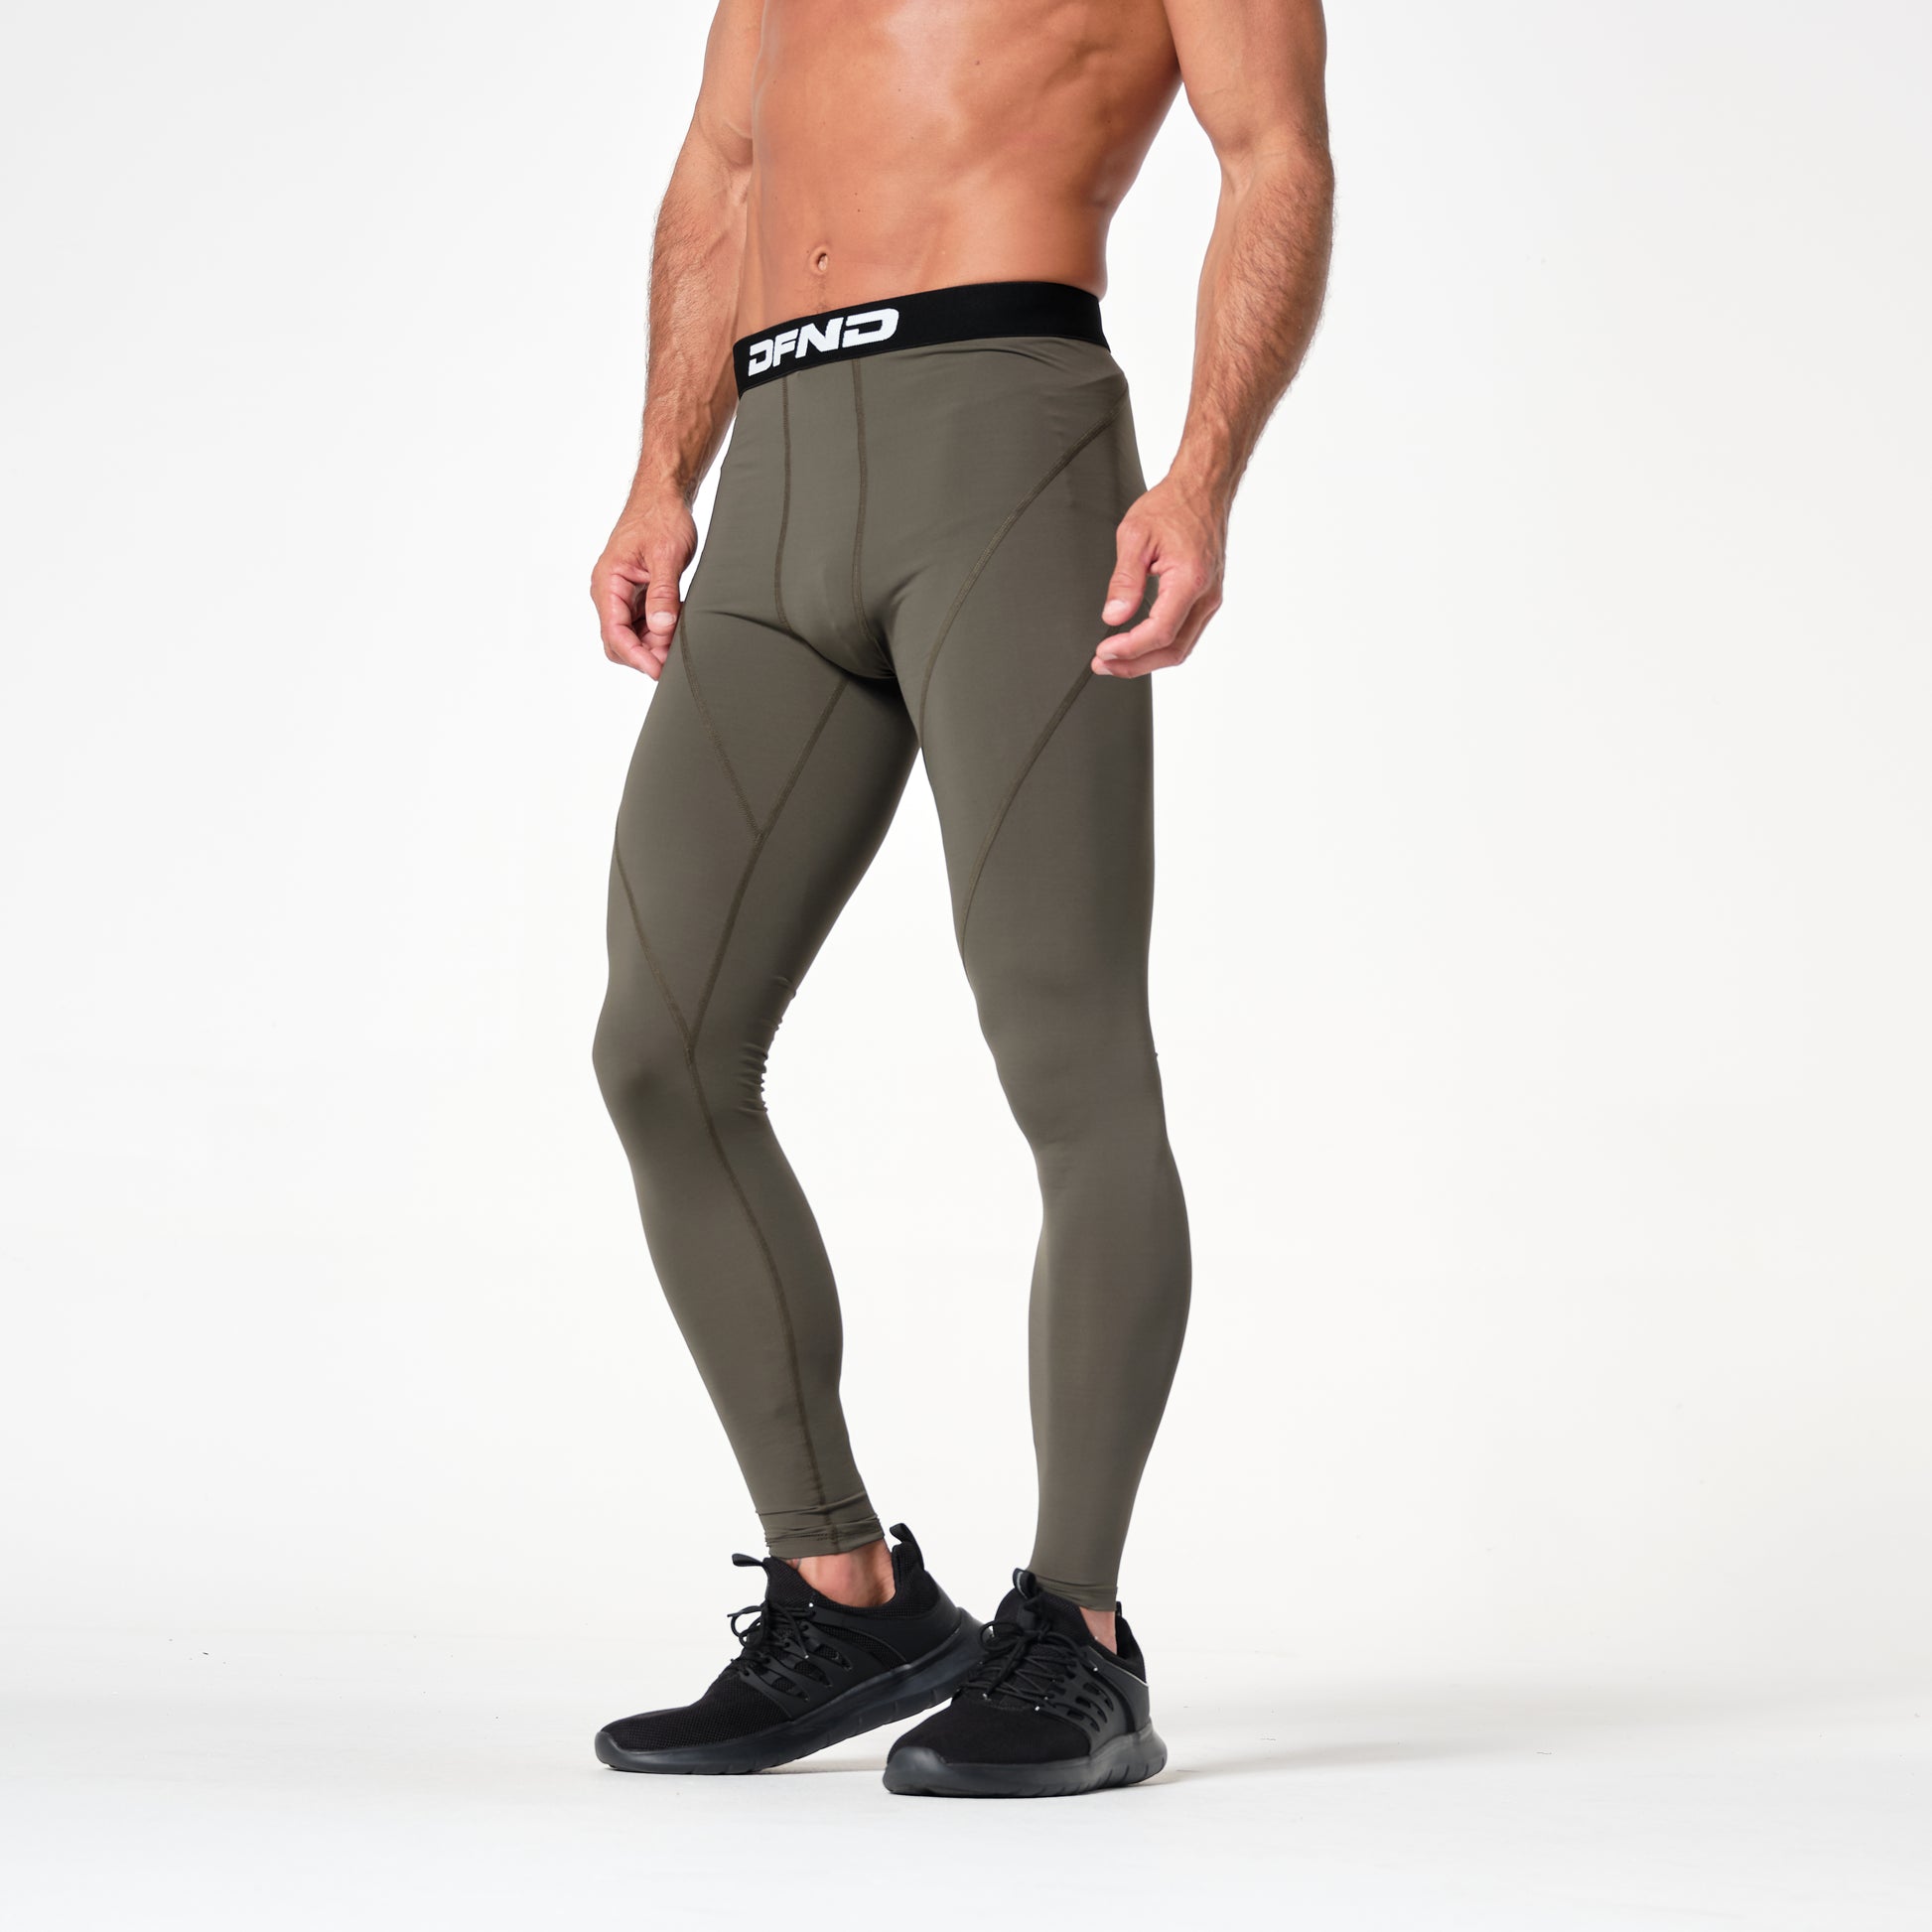 Up To 70% Off on Men's Compression Pants Worko